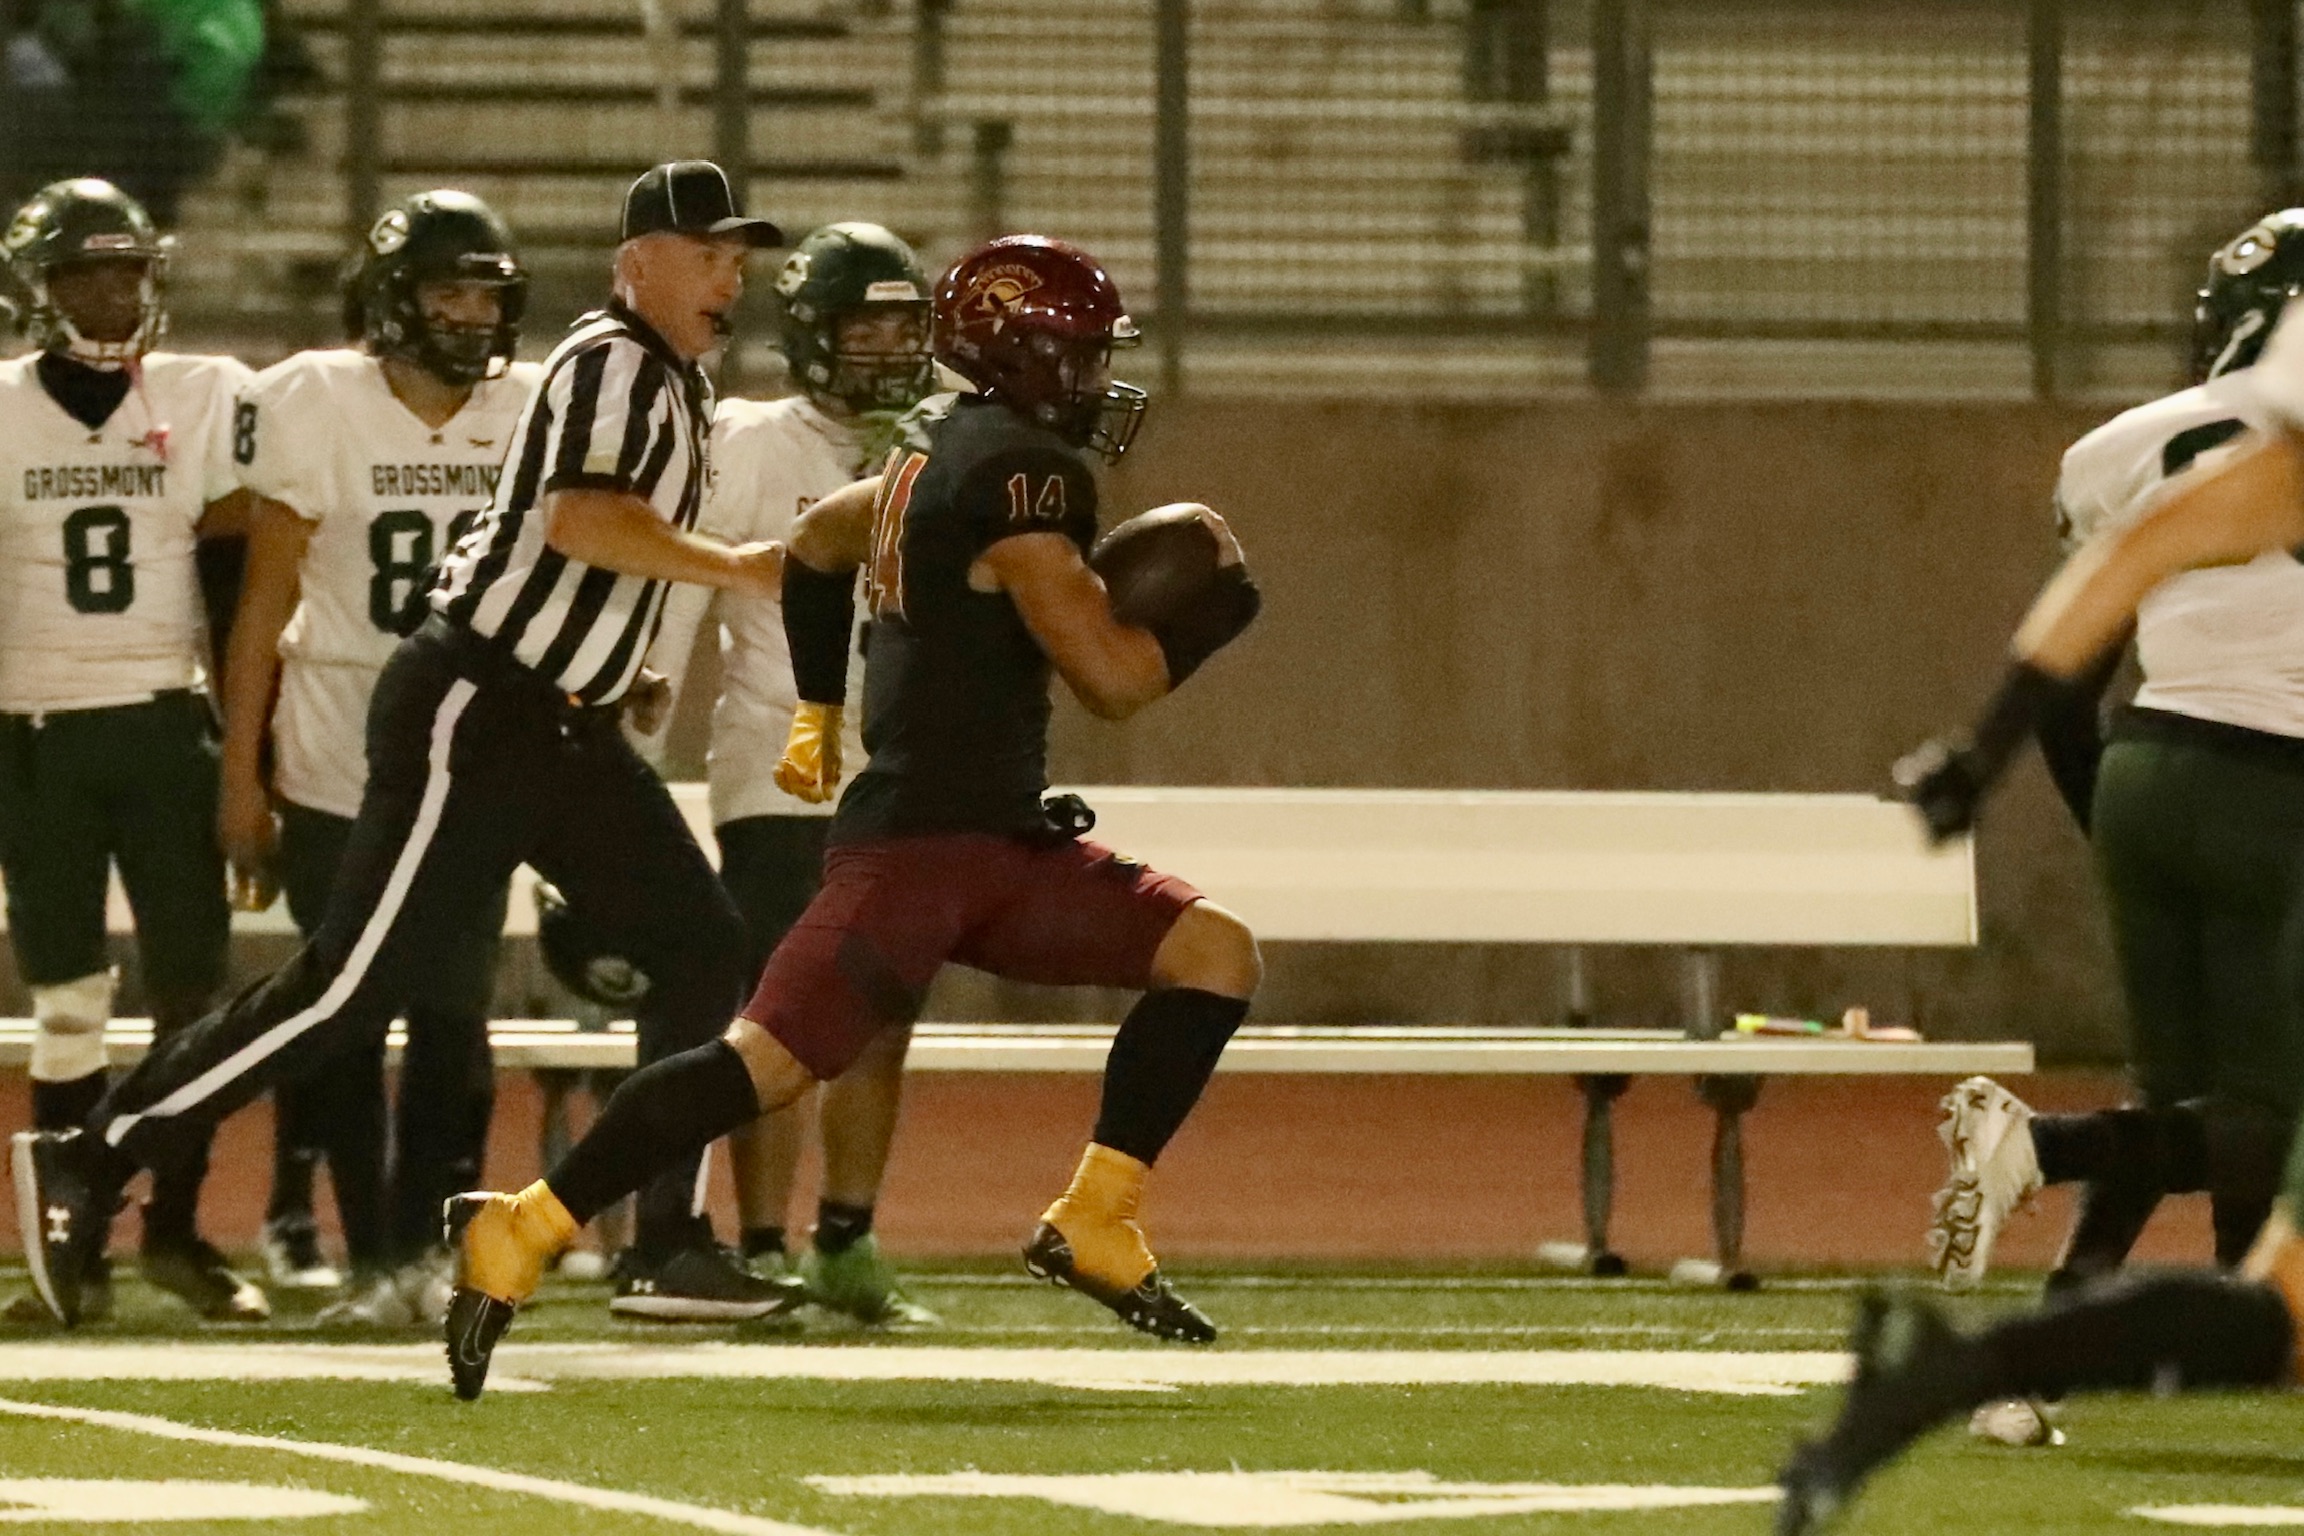 Ivan Ostry takes off on his 100-yard kick return for a TD on Saturday (photo by Michael Watkins).